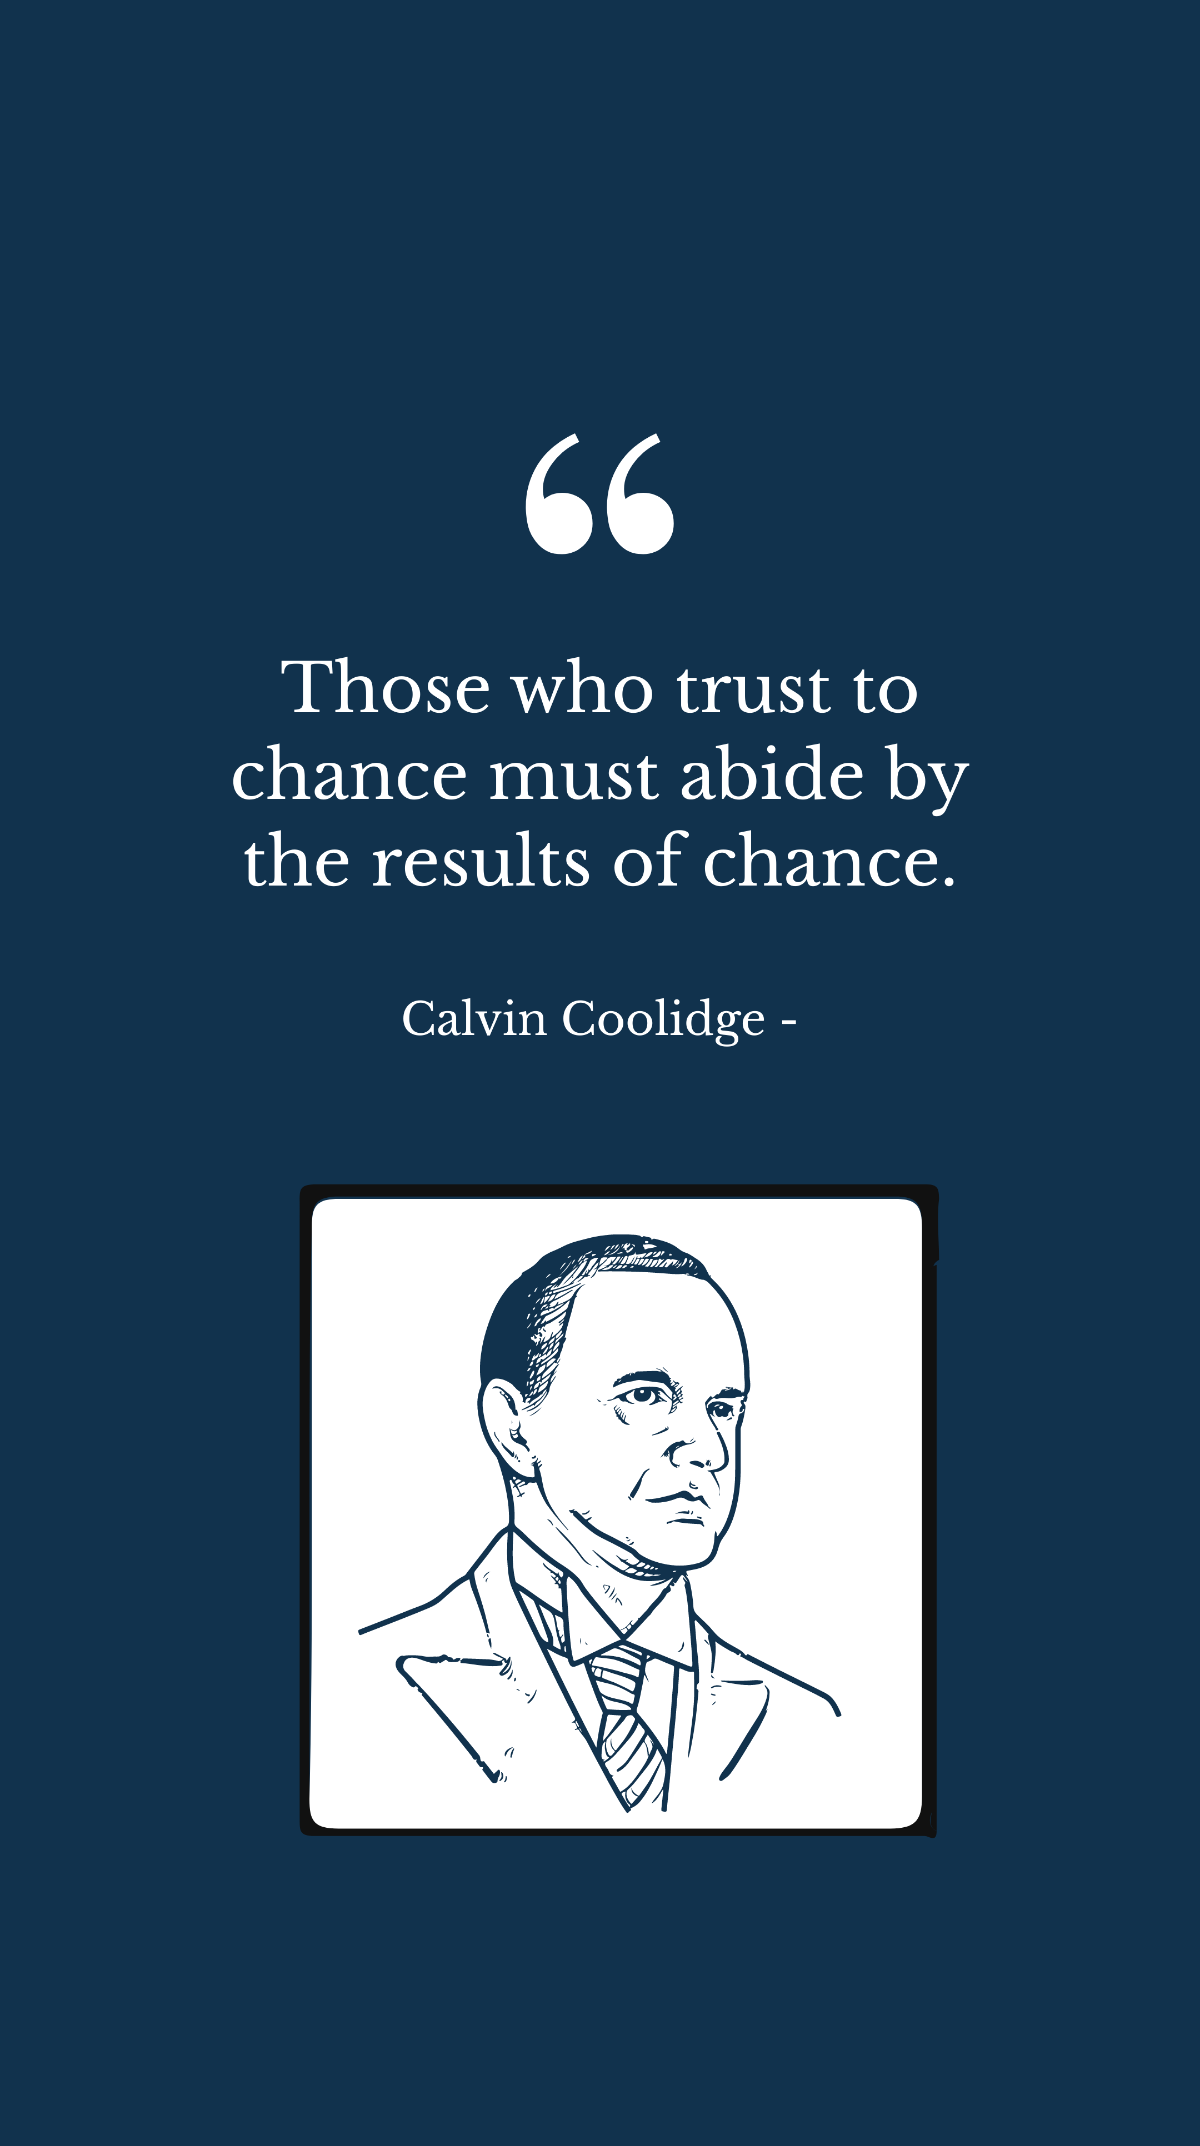 Free Calvin Coolidge - Those who trust to chance must abide by the results of chance. Template